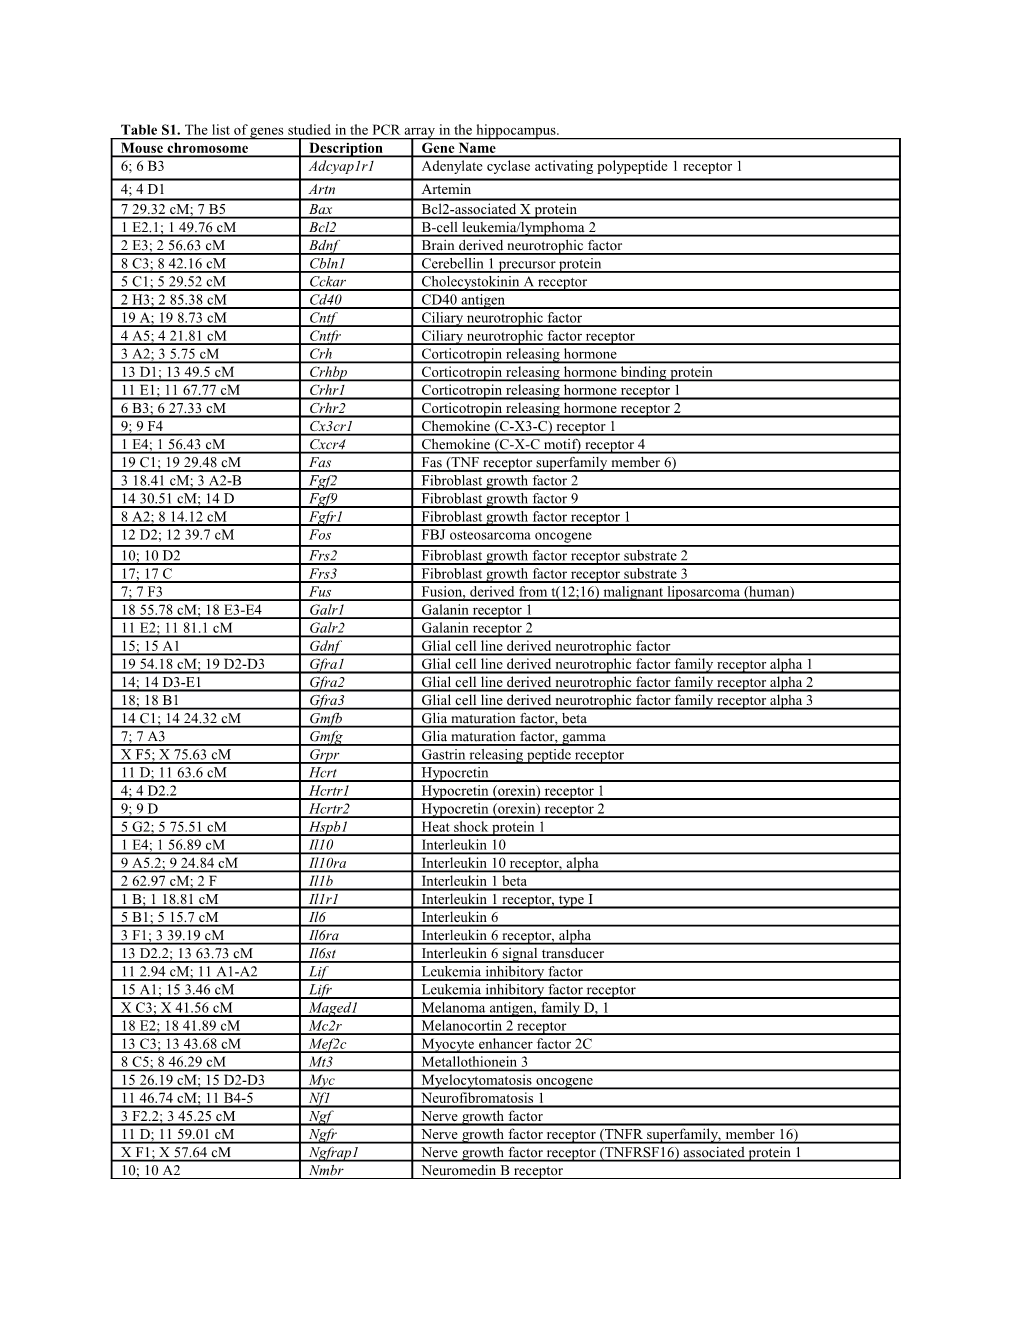 Table S1. the List of Genes Studied in the PCR Array in the Hippocampus